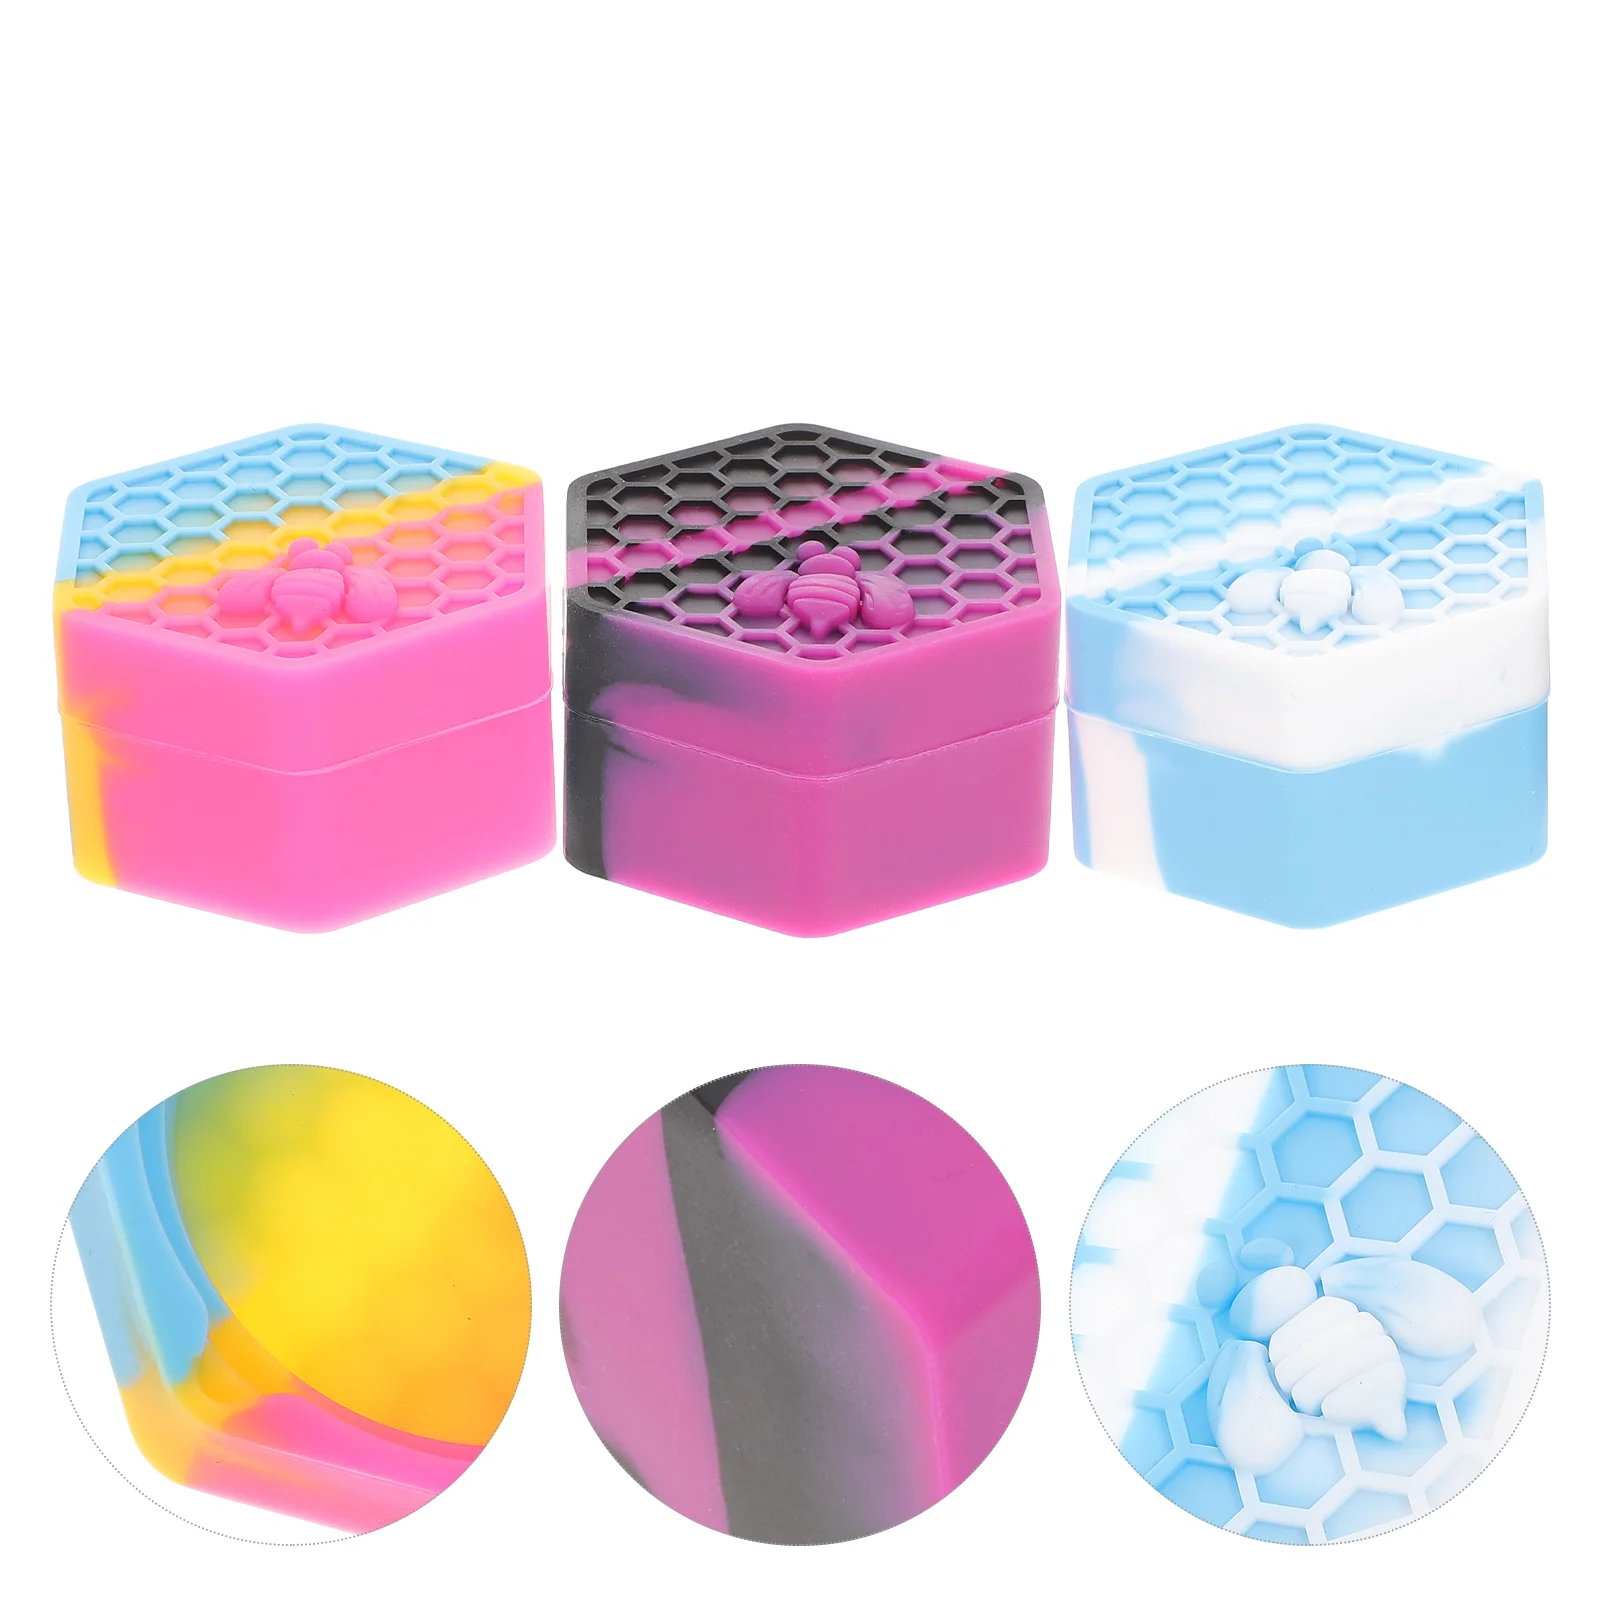 

Mold Silicone Holder Jar Wax Containers Jars Jewelry Soap Oil Box Storage Container Tealight Making Trinket Brush Candy Ashtray